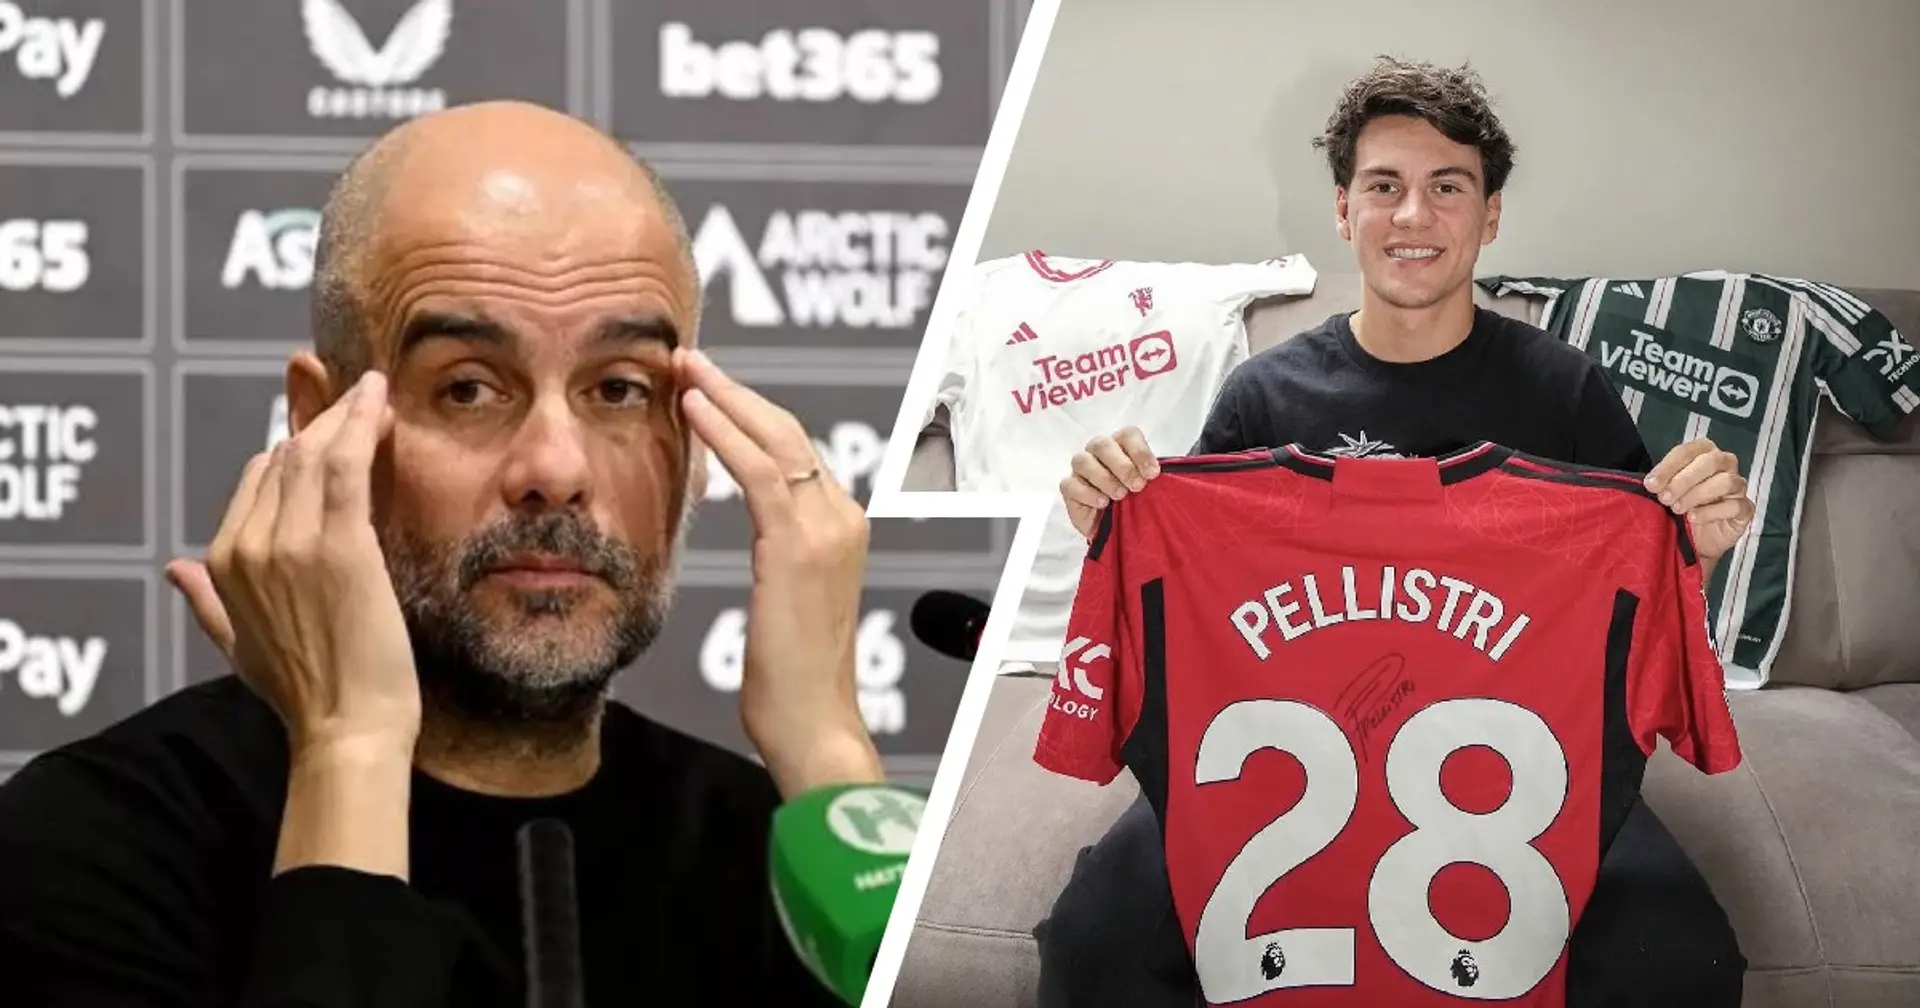 'If this guy and his girlfriend believe that, it's ok': Pep Guardiola responds to Pellistri's recent words